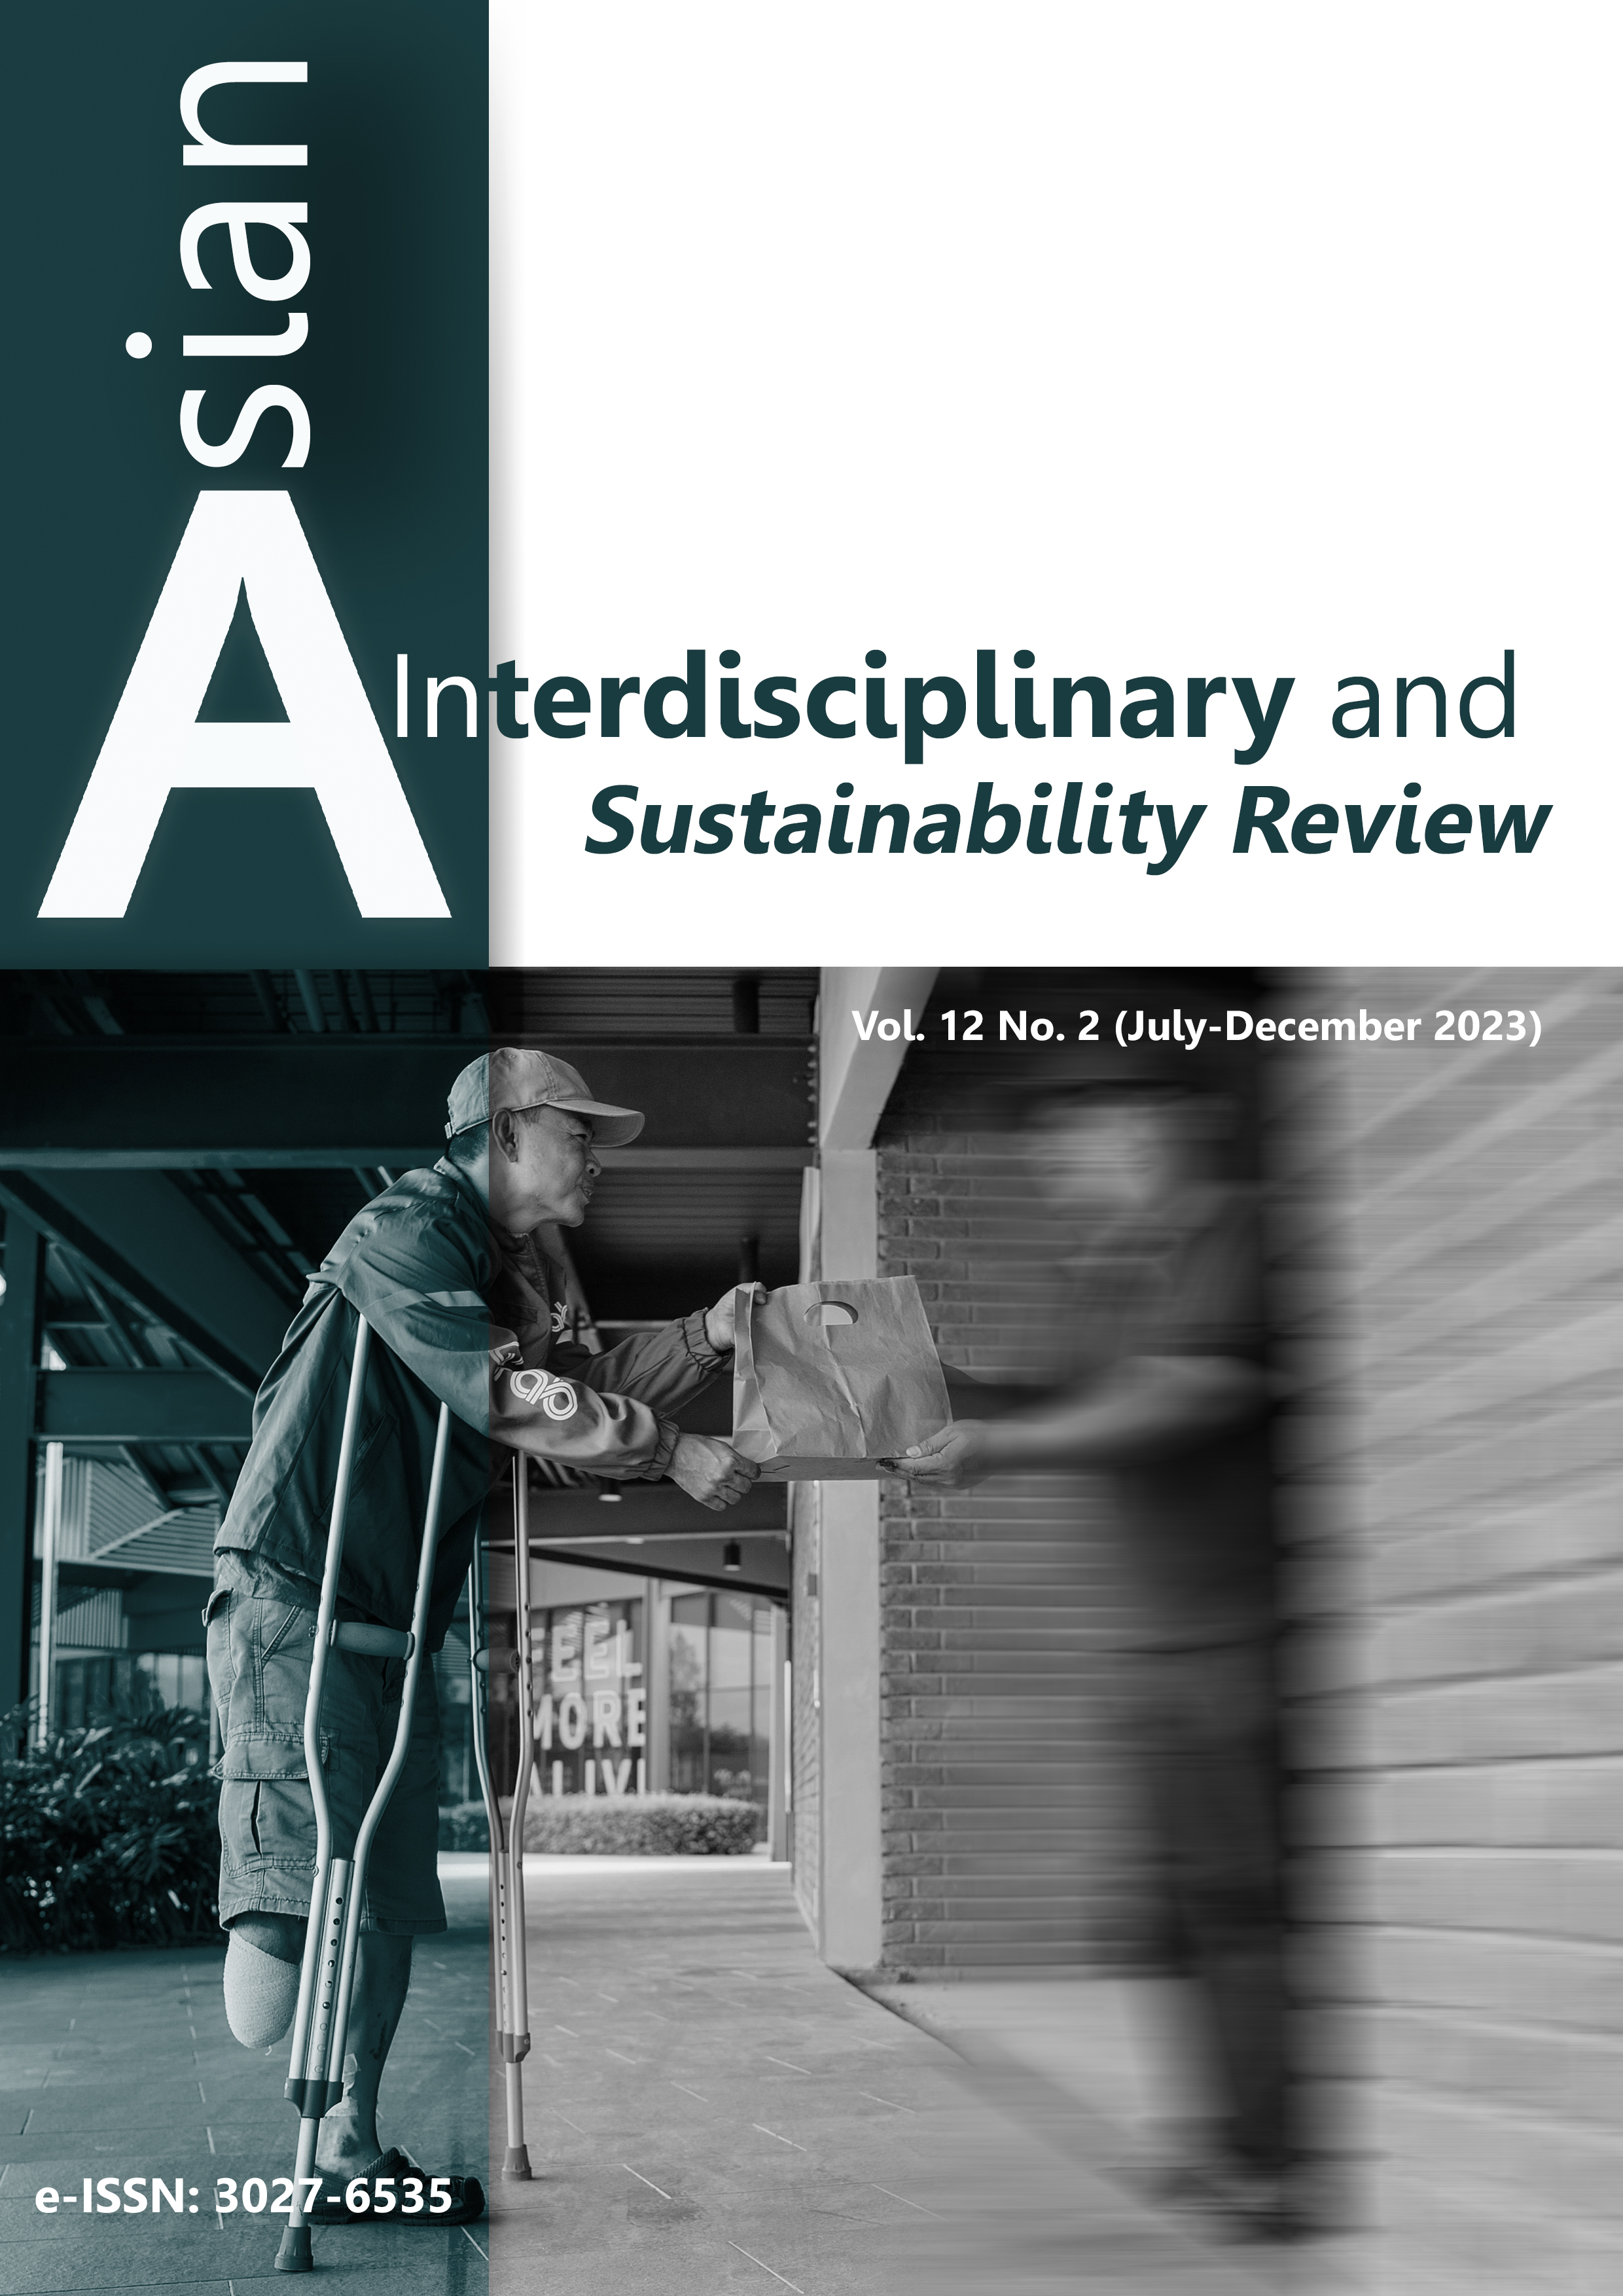 					View Vol. 12 No. 2 (2023): Asian Interdisciplinary and Sustainability Review
				